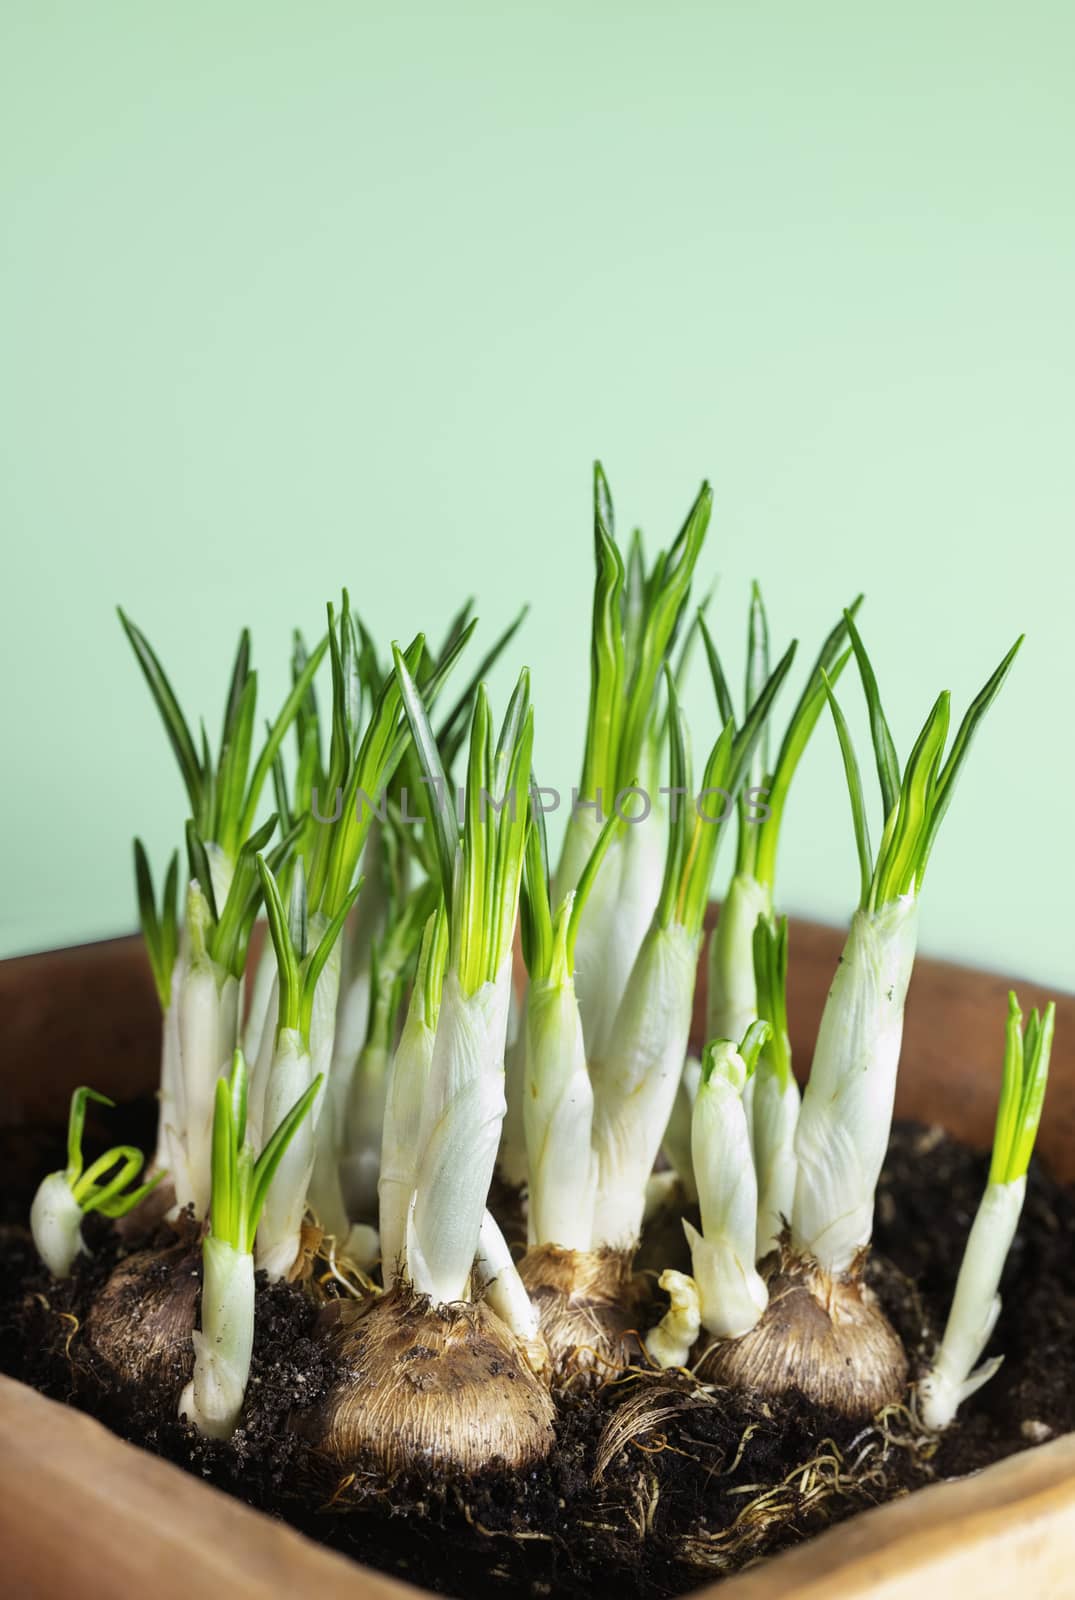 Beautiful  crocus flower  bulbs in flower pot on colored background closed  flowers with long white stems and green leaves